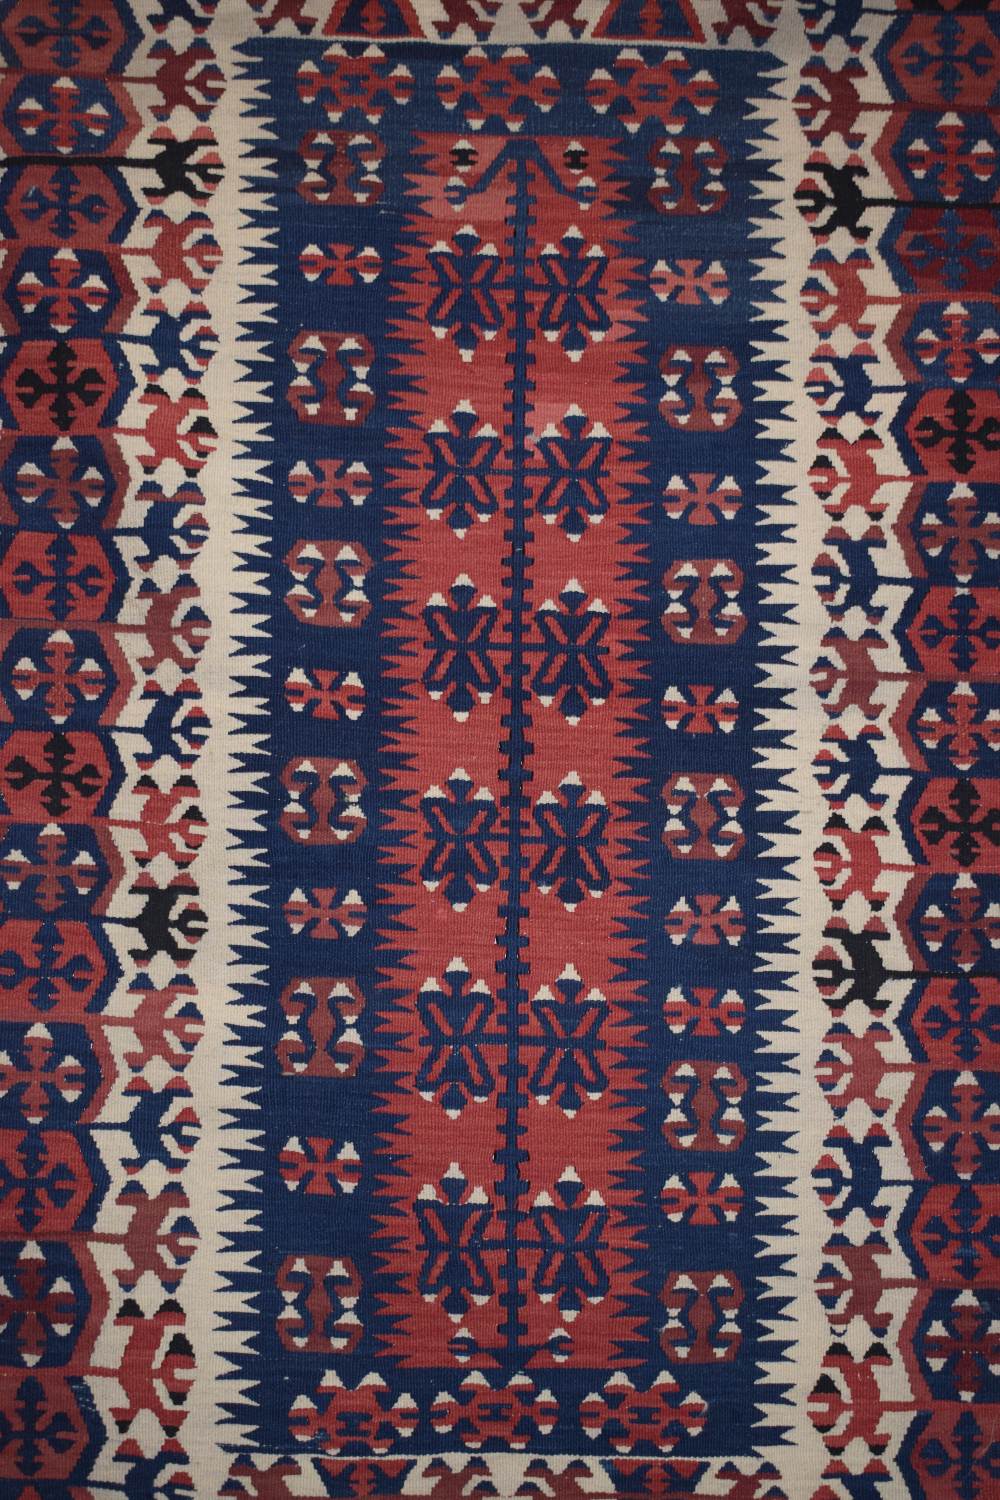 Two Anatolian rugs, the first: Konya kelim, central Anatolia, circa 1940s-50s, 4ft. 11in. X 3ft. - Image 7 of 17